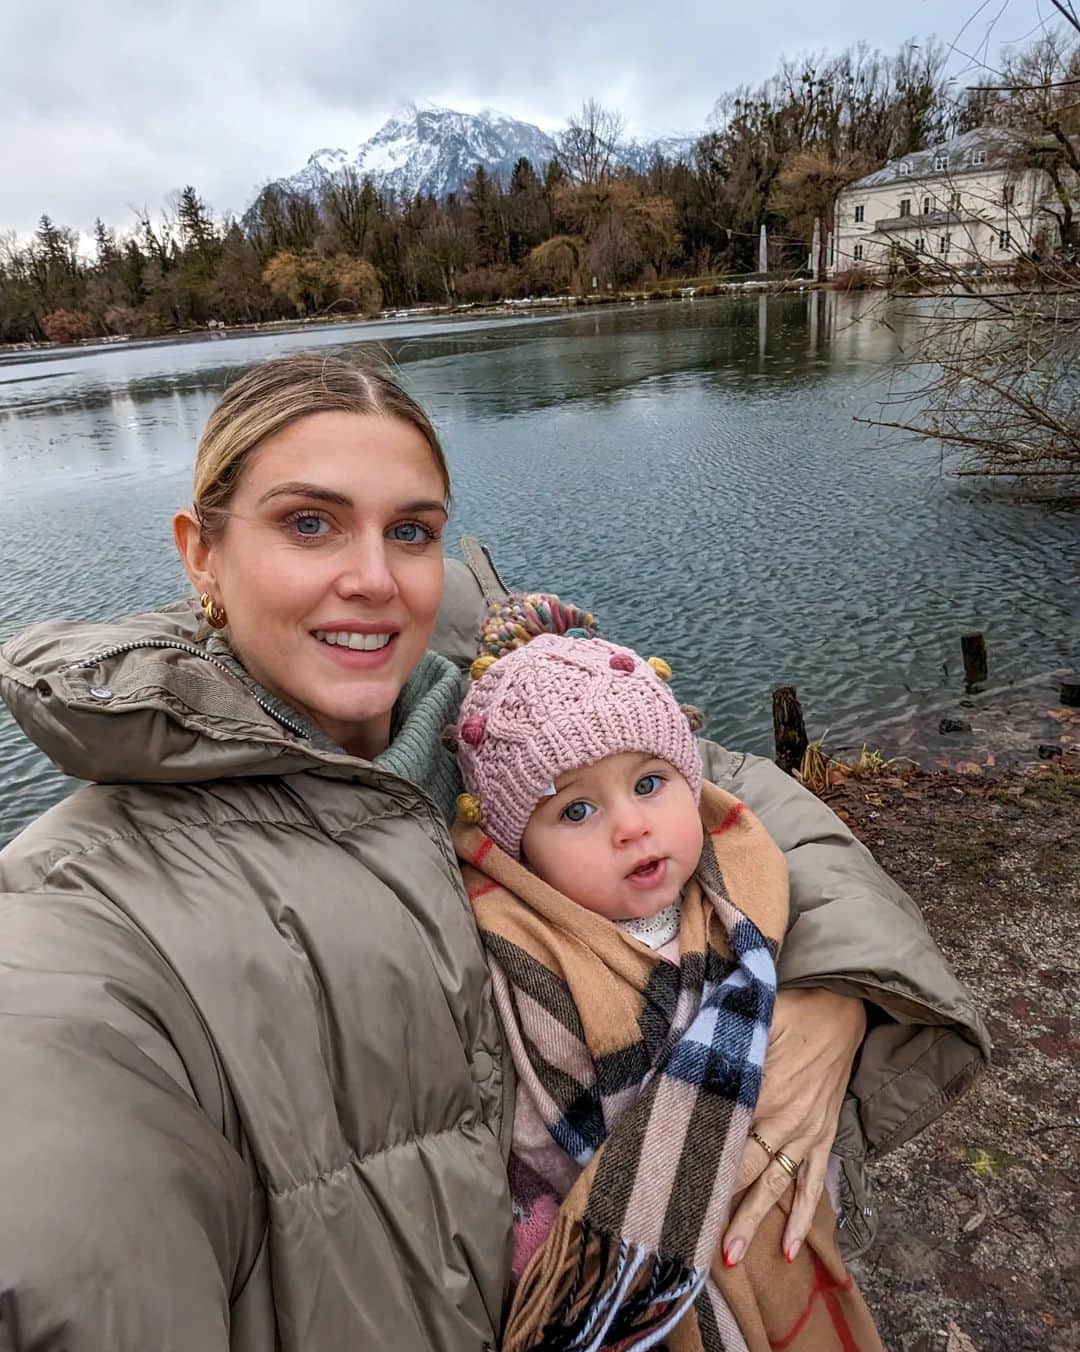 Ashley Jamesのインスタグラム：「Bucket list ticked off: the Sound of Music tour. 🎶❤️  What a way to end our trip to Salzburg! We're on the way back to the airport now but yesterday afternoon we did a Sound of Music tour and it was amazing! 💕🎶  Despite the film coming out in 1965, apparently the Sound of Music still attracts 300,000 tourists a year to Salzburg, which is just mind-blowing.  I've not seen the film for a while, but when I was at first school, baby Ashley would take the video in every single day hoping my teacher would let us watch it. I remember the VHS had a big plaster on with my name etched on. After a while my teacher gave in and let us watch it and asked me not to bring it back again. So I started bringing the tape cassette in instead. I was absolutely obsessed. I remember my mum telling me you could go to the real place and I couldn't believe it and I hoped that one day I could do it!   We saw the pavilion where they sang "16 going on 17", the church where they got married, the lake where they fell in on the boat, the path where Maria sings down, the two houses they filmed the Von Trapp home. And we learned so much about the real vom Trapp family. Our guide was so funny and amazing, and we saw so much of the Salzburg lake district which is somewhere I'd definitely want to come back in the summer. It's such a beautiful place!  And the best thing is - the littles were amazing even on a 4 hour tour! We brought lots of snacks and the iPad and there were lots of stops along the way!  What a beautiful place to come to for Nana's special birthday. And now it's back to reality to the work rush before we get to enjoy Christmas.   If anyone has any questions about our trip I'd be very happy to try and answer. ❤️✨🙏🏼」